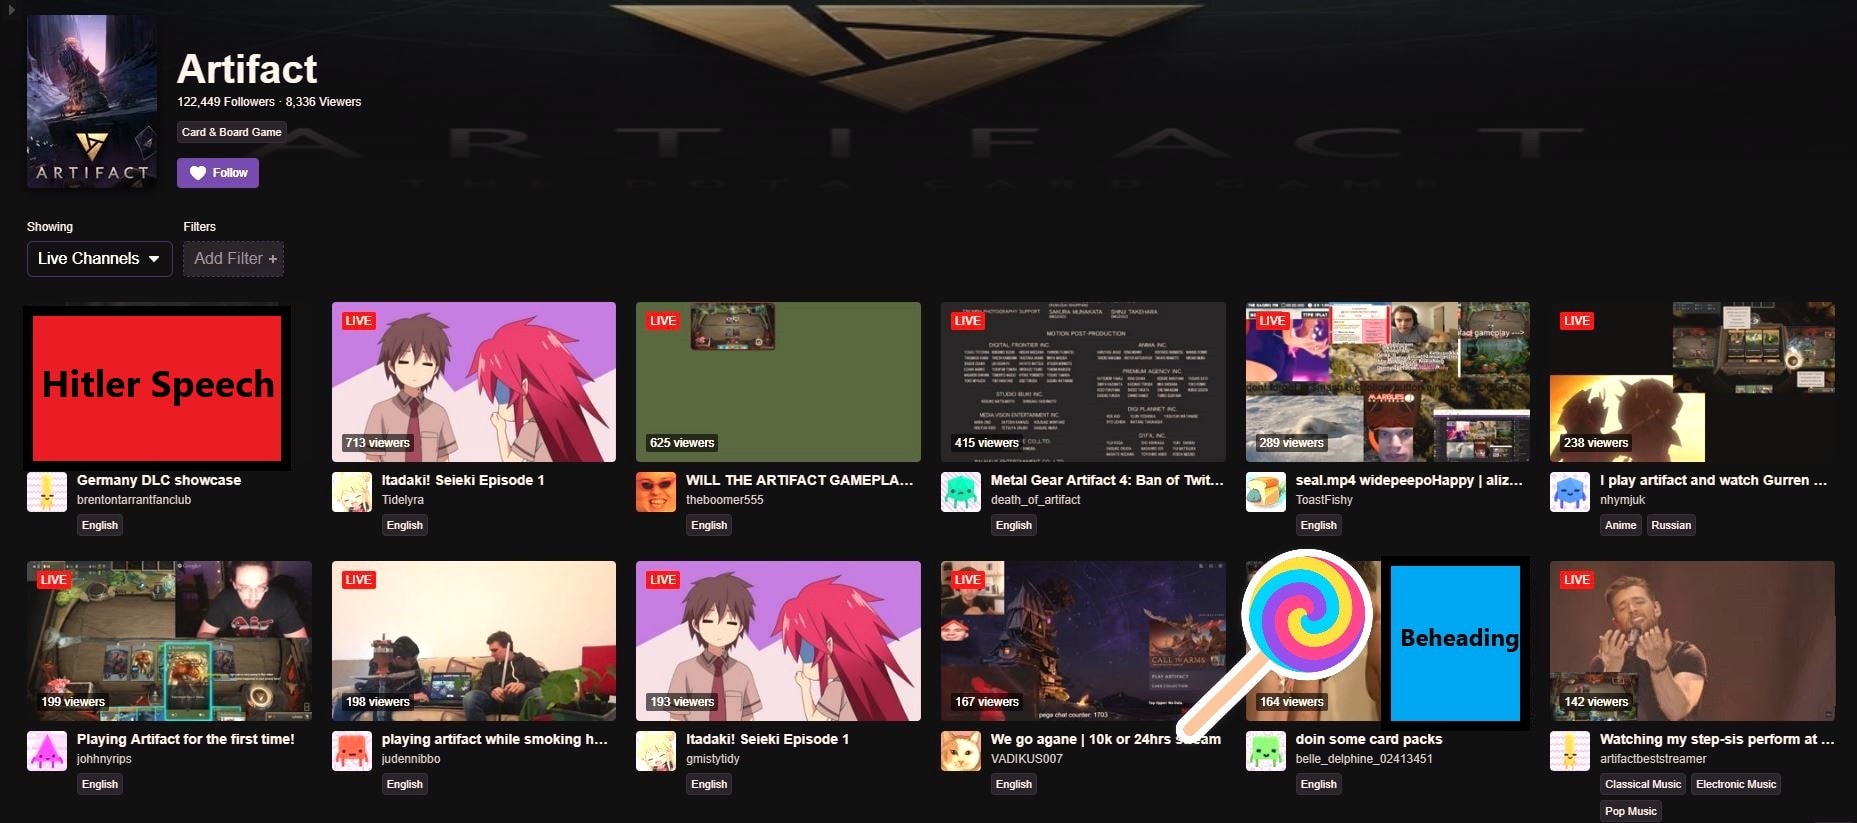 1857px x 823px - Artifact on Twitch has devolved into porn and anime (both mistakes)